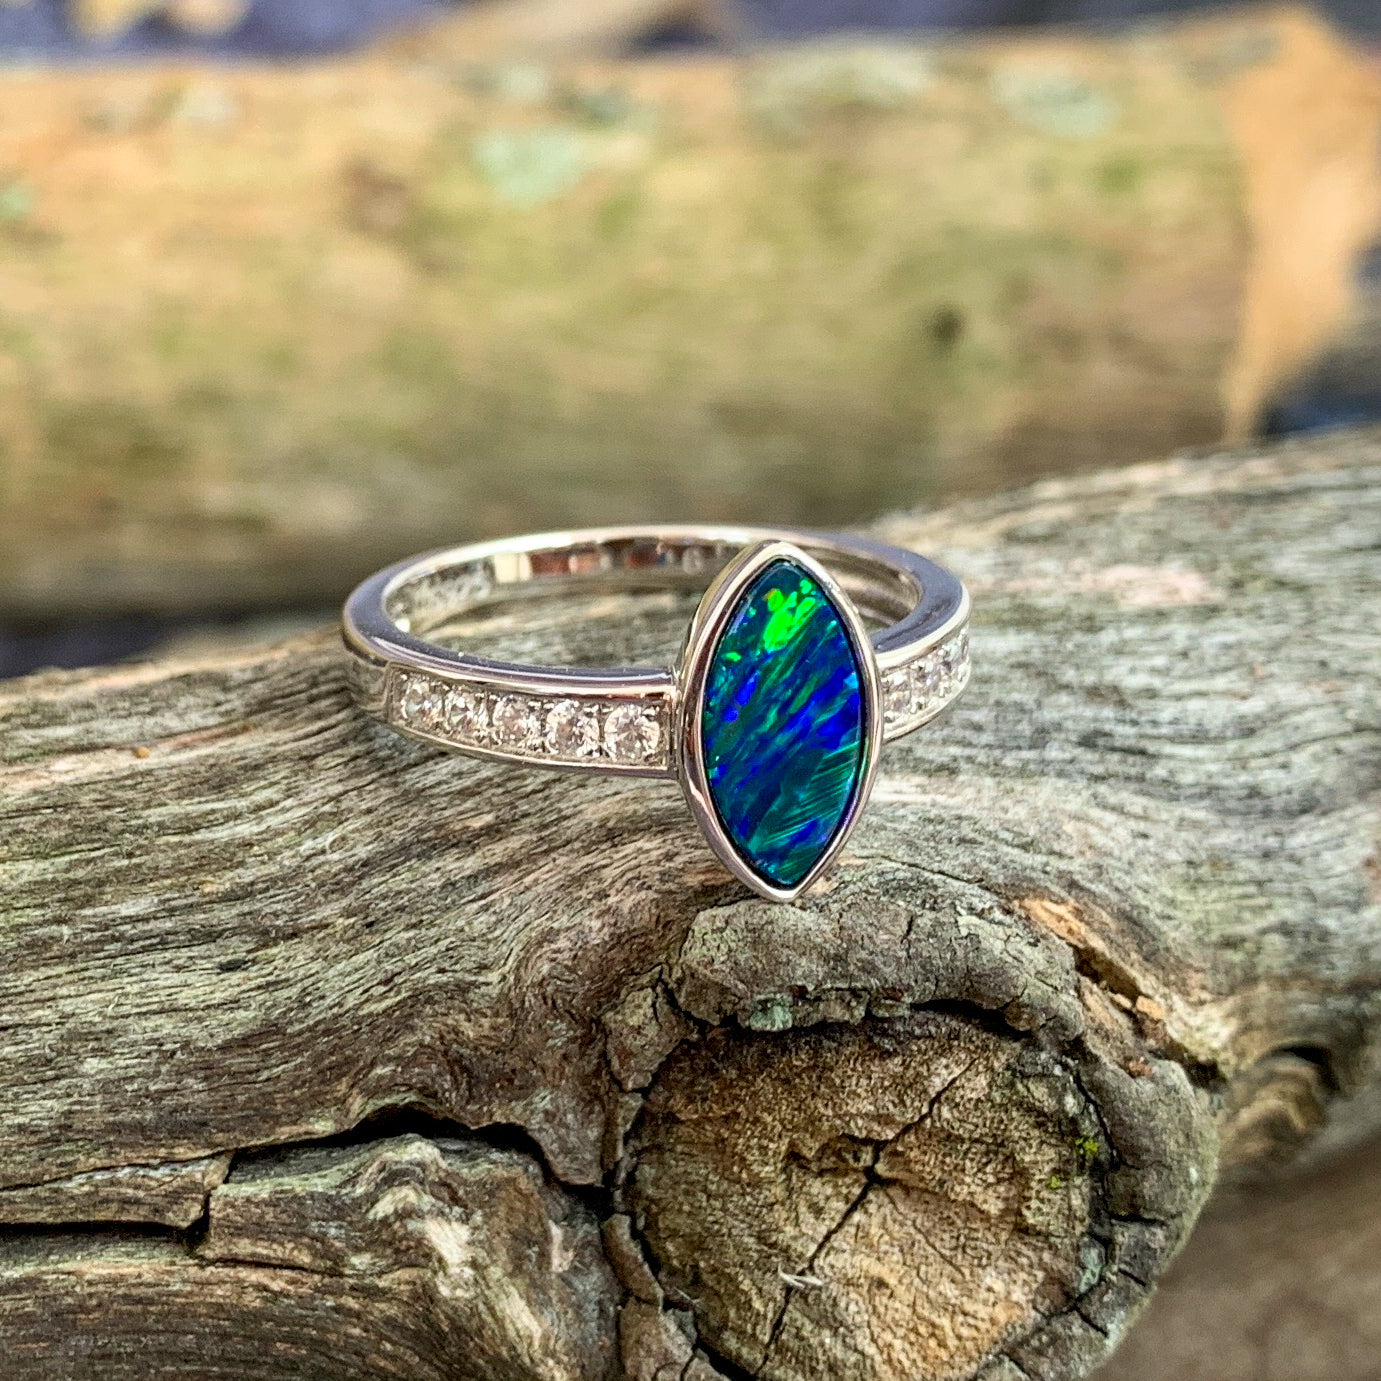 Sterling Silver Marquise shape Opal doublet and cubic zirconia ring - Masterpiece Jewellery Opal & Gems Sydney Australia | Online Shop